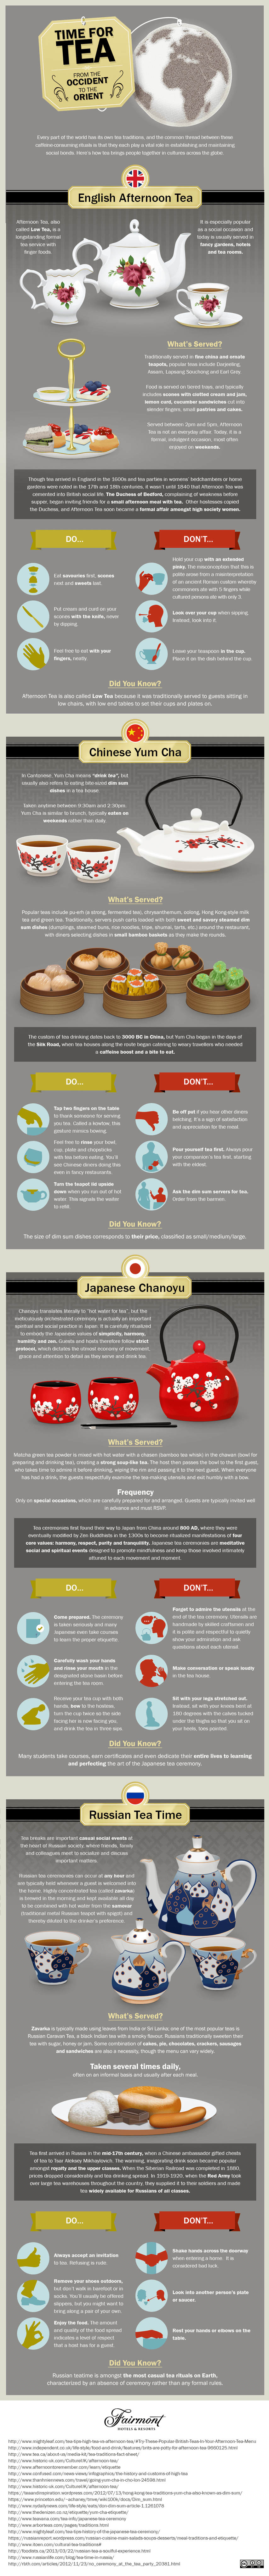 From Afternoon Tea to Japanese Chanoyu, discover some of the world's different tea traditions with this handy infographic.